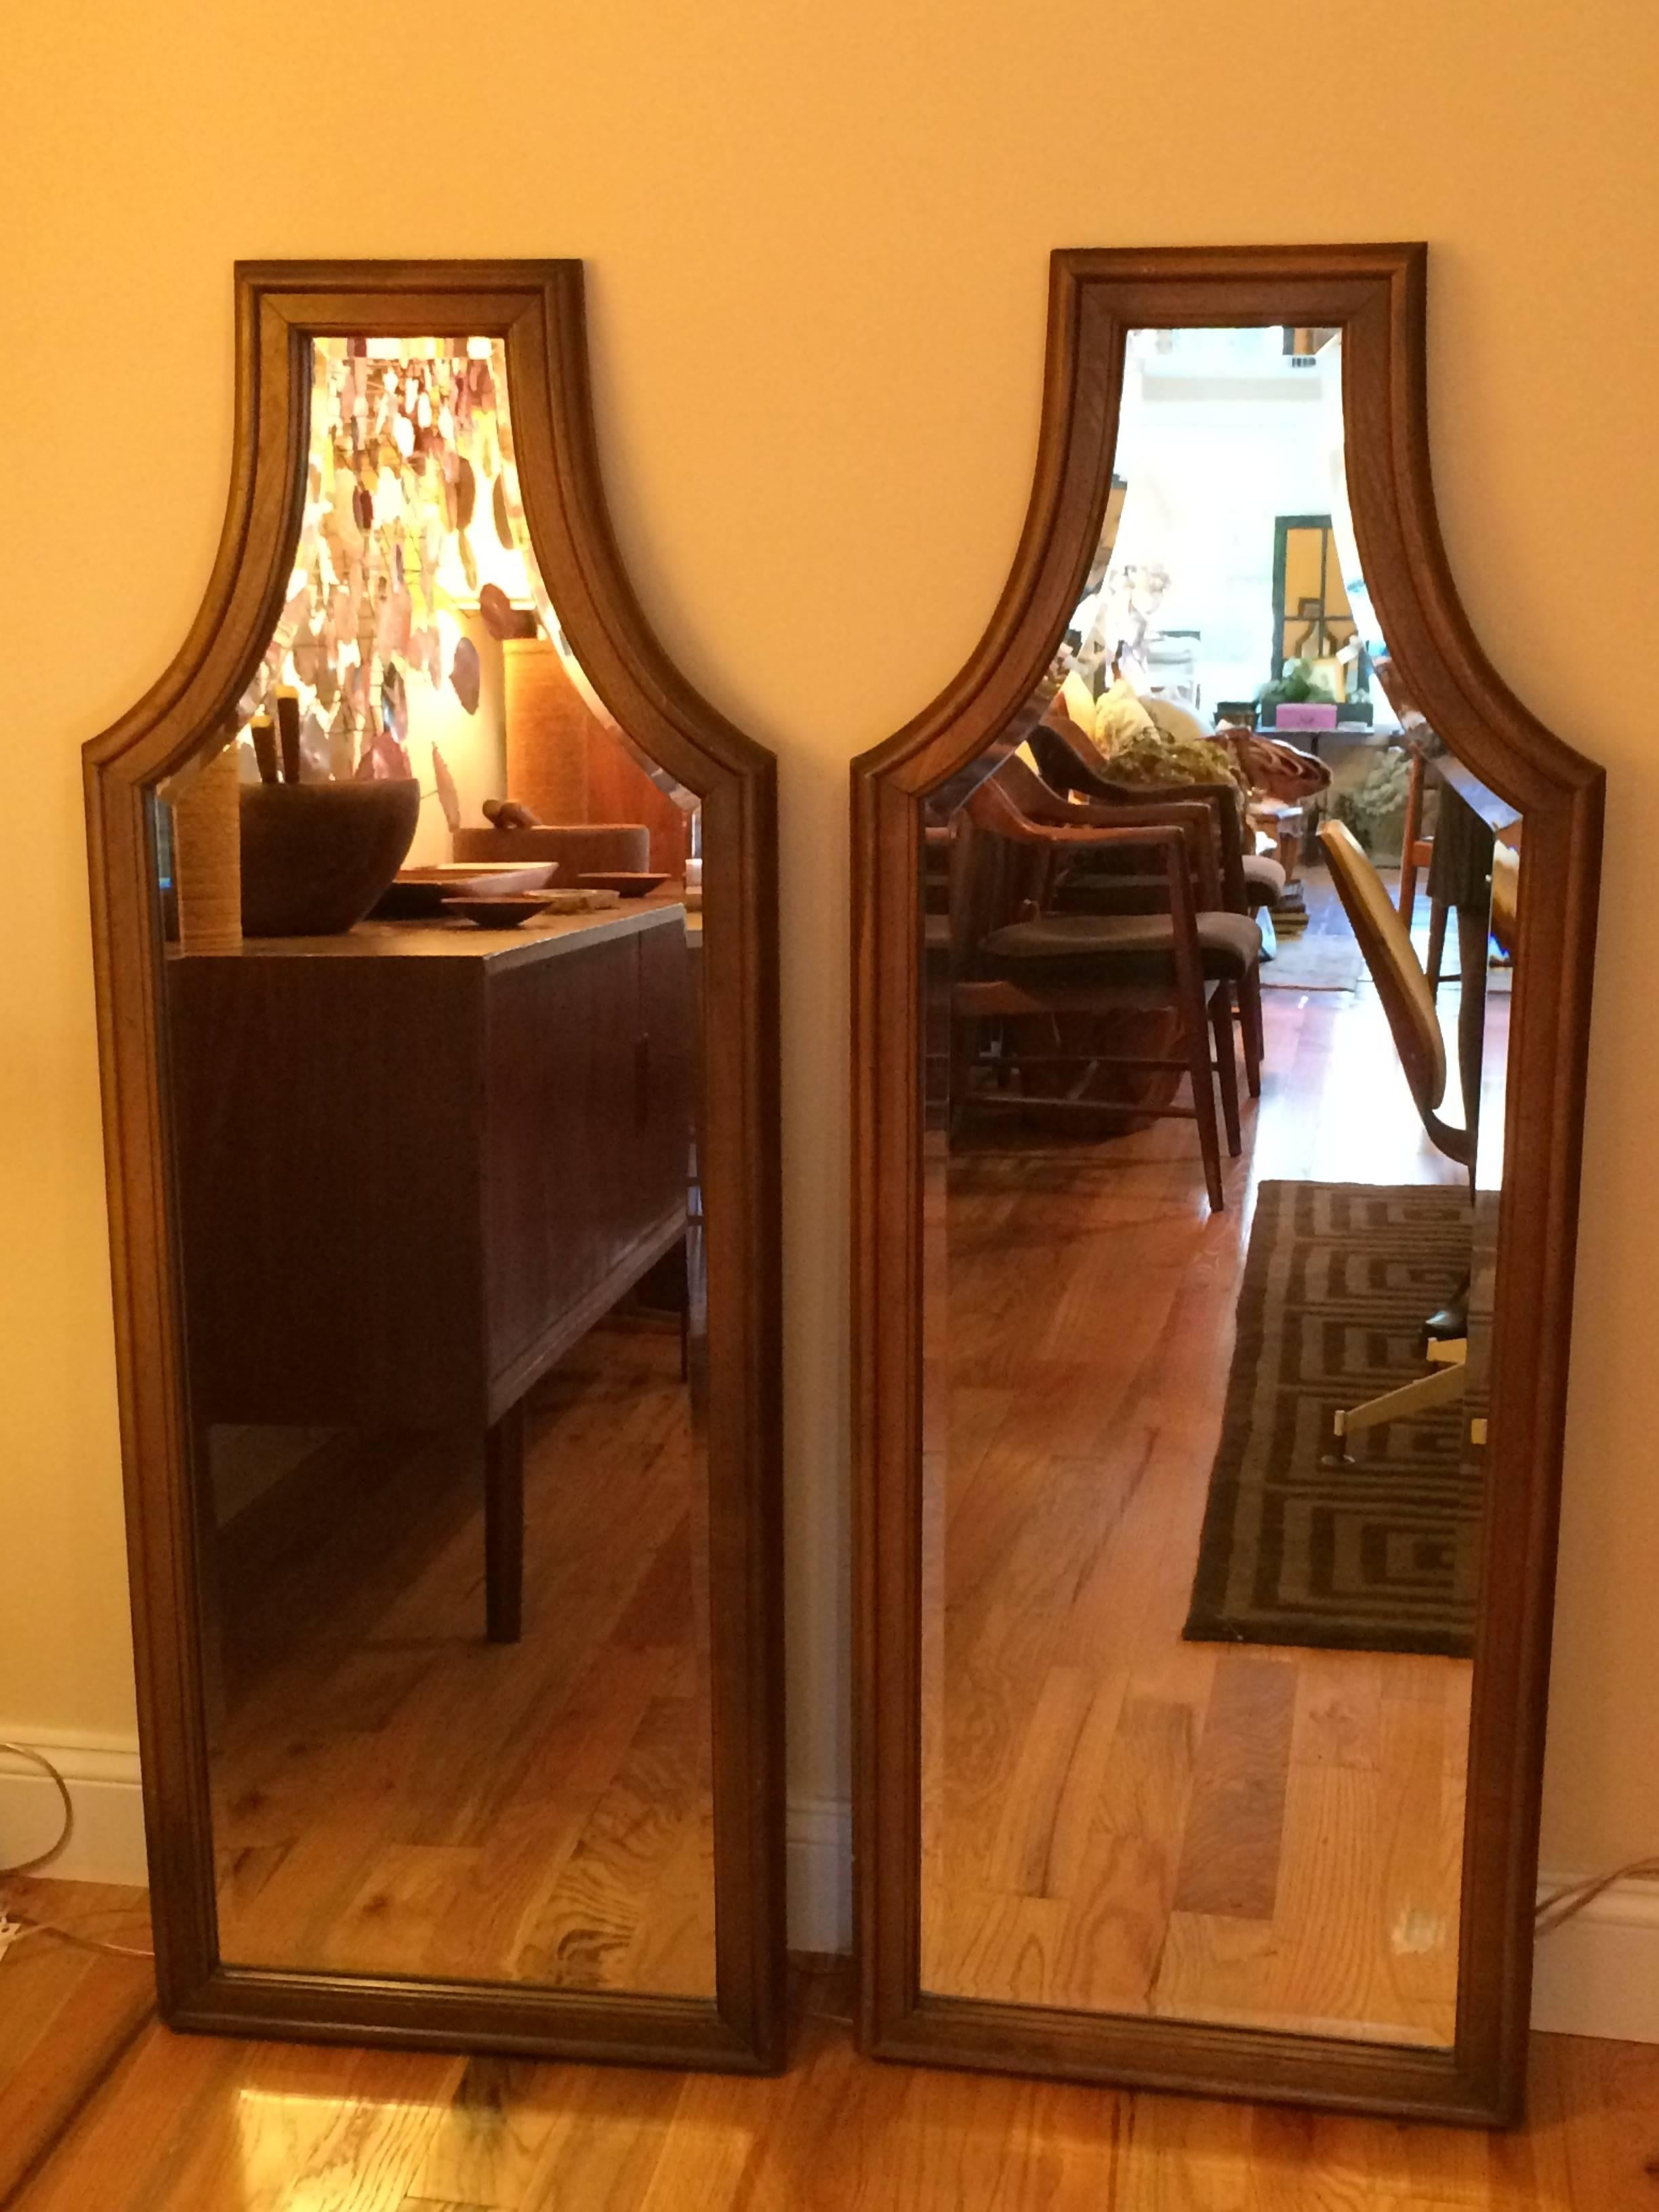 Pair of Hollywood Regency mirrors. This gorgeous pair with one inch bevel will magnificently glamorize any room!
Parcel shipping rates may be cheaper . Please ask for more details.